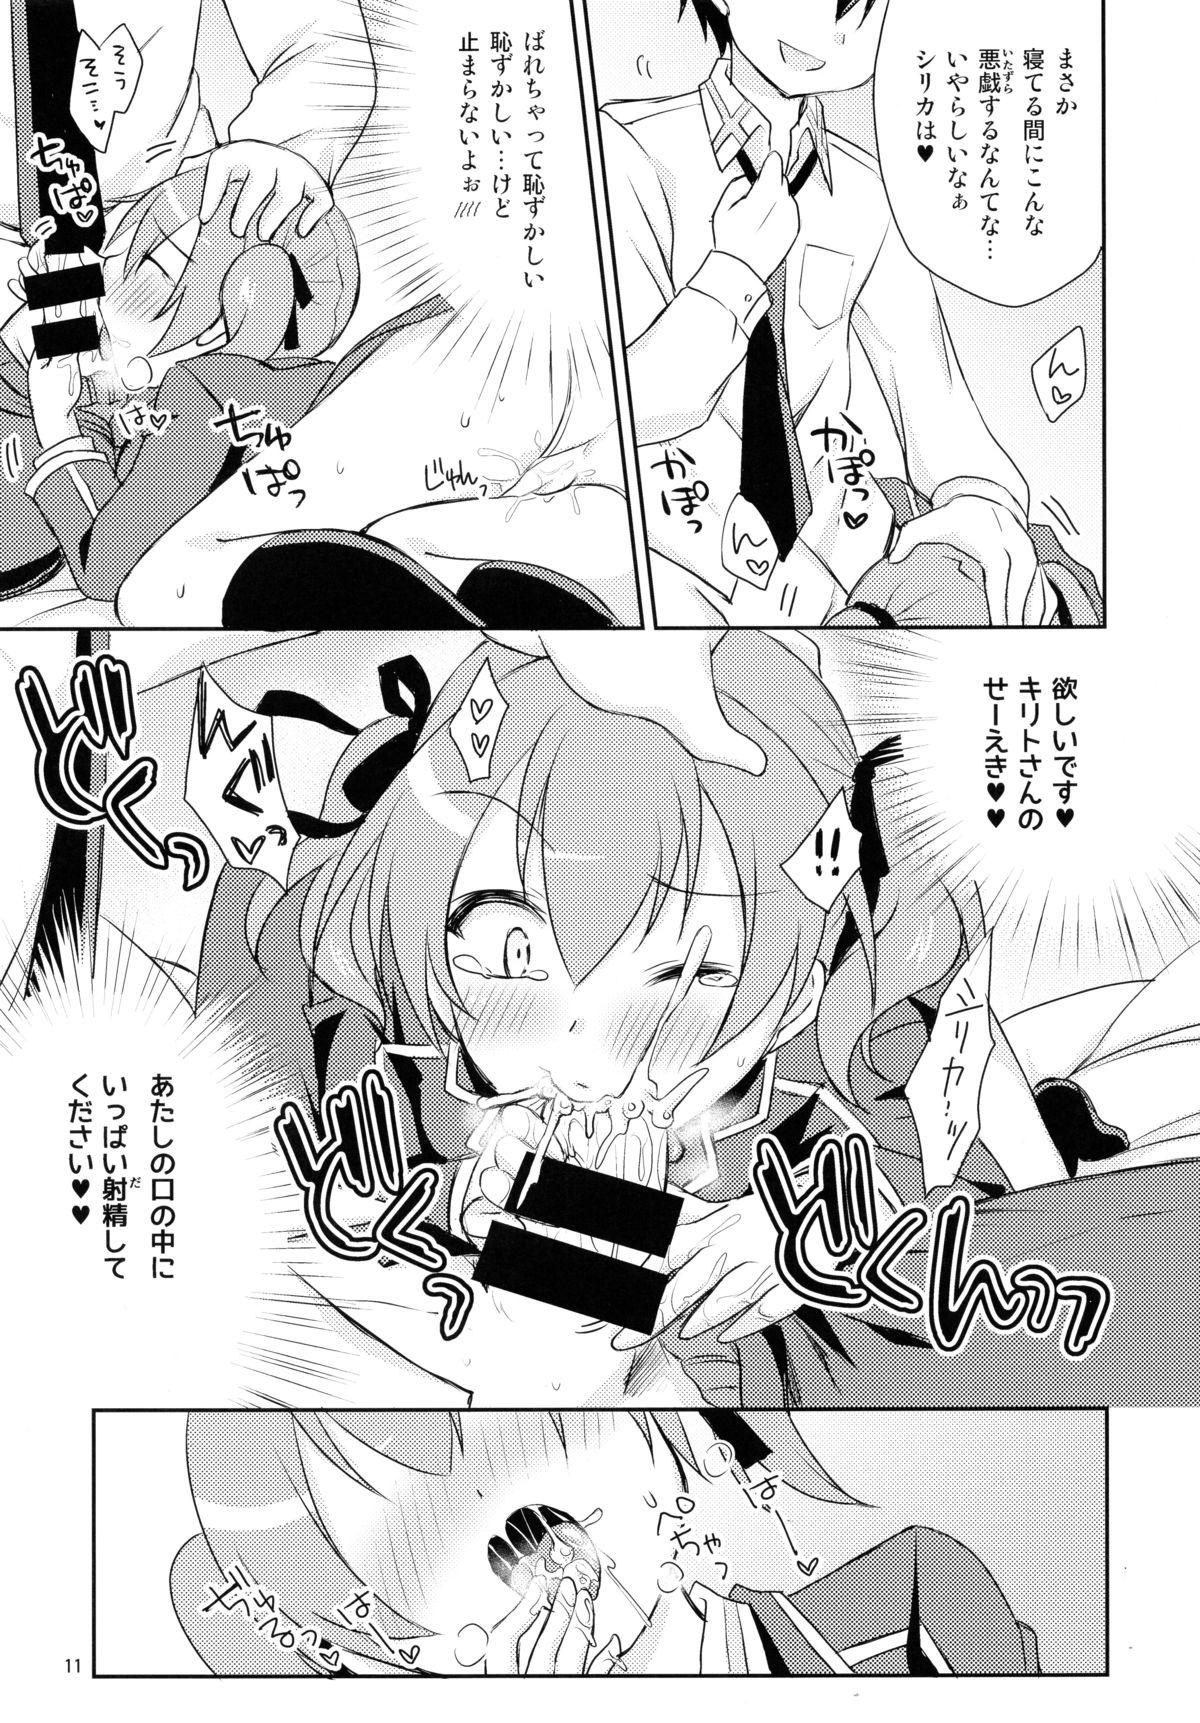 Rimming Itazura Silica-chan - Sword art online Handsome - Page 11